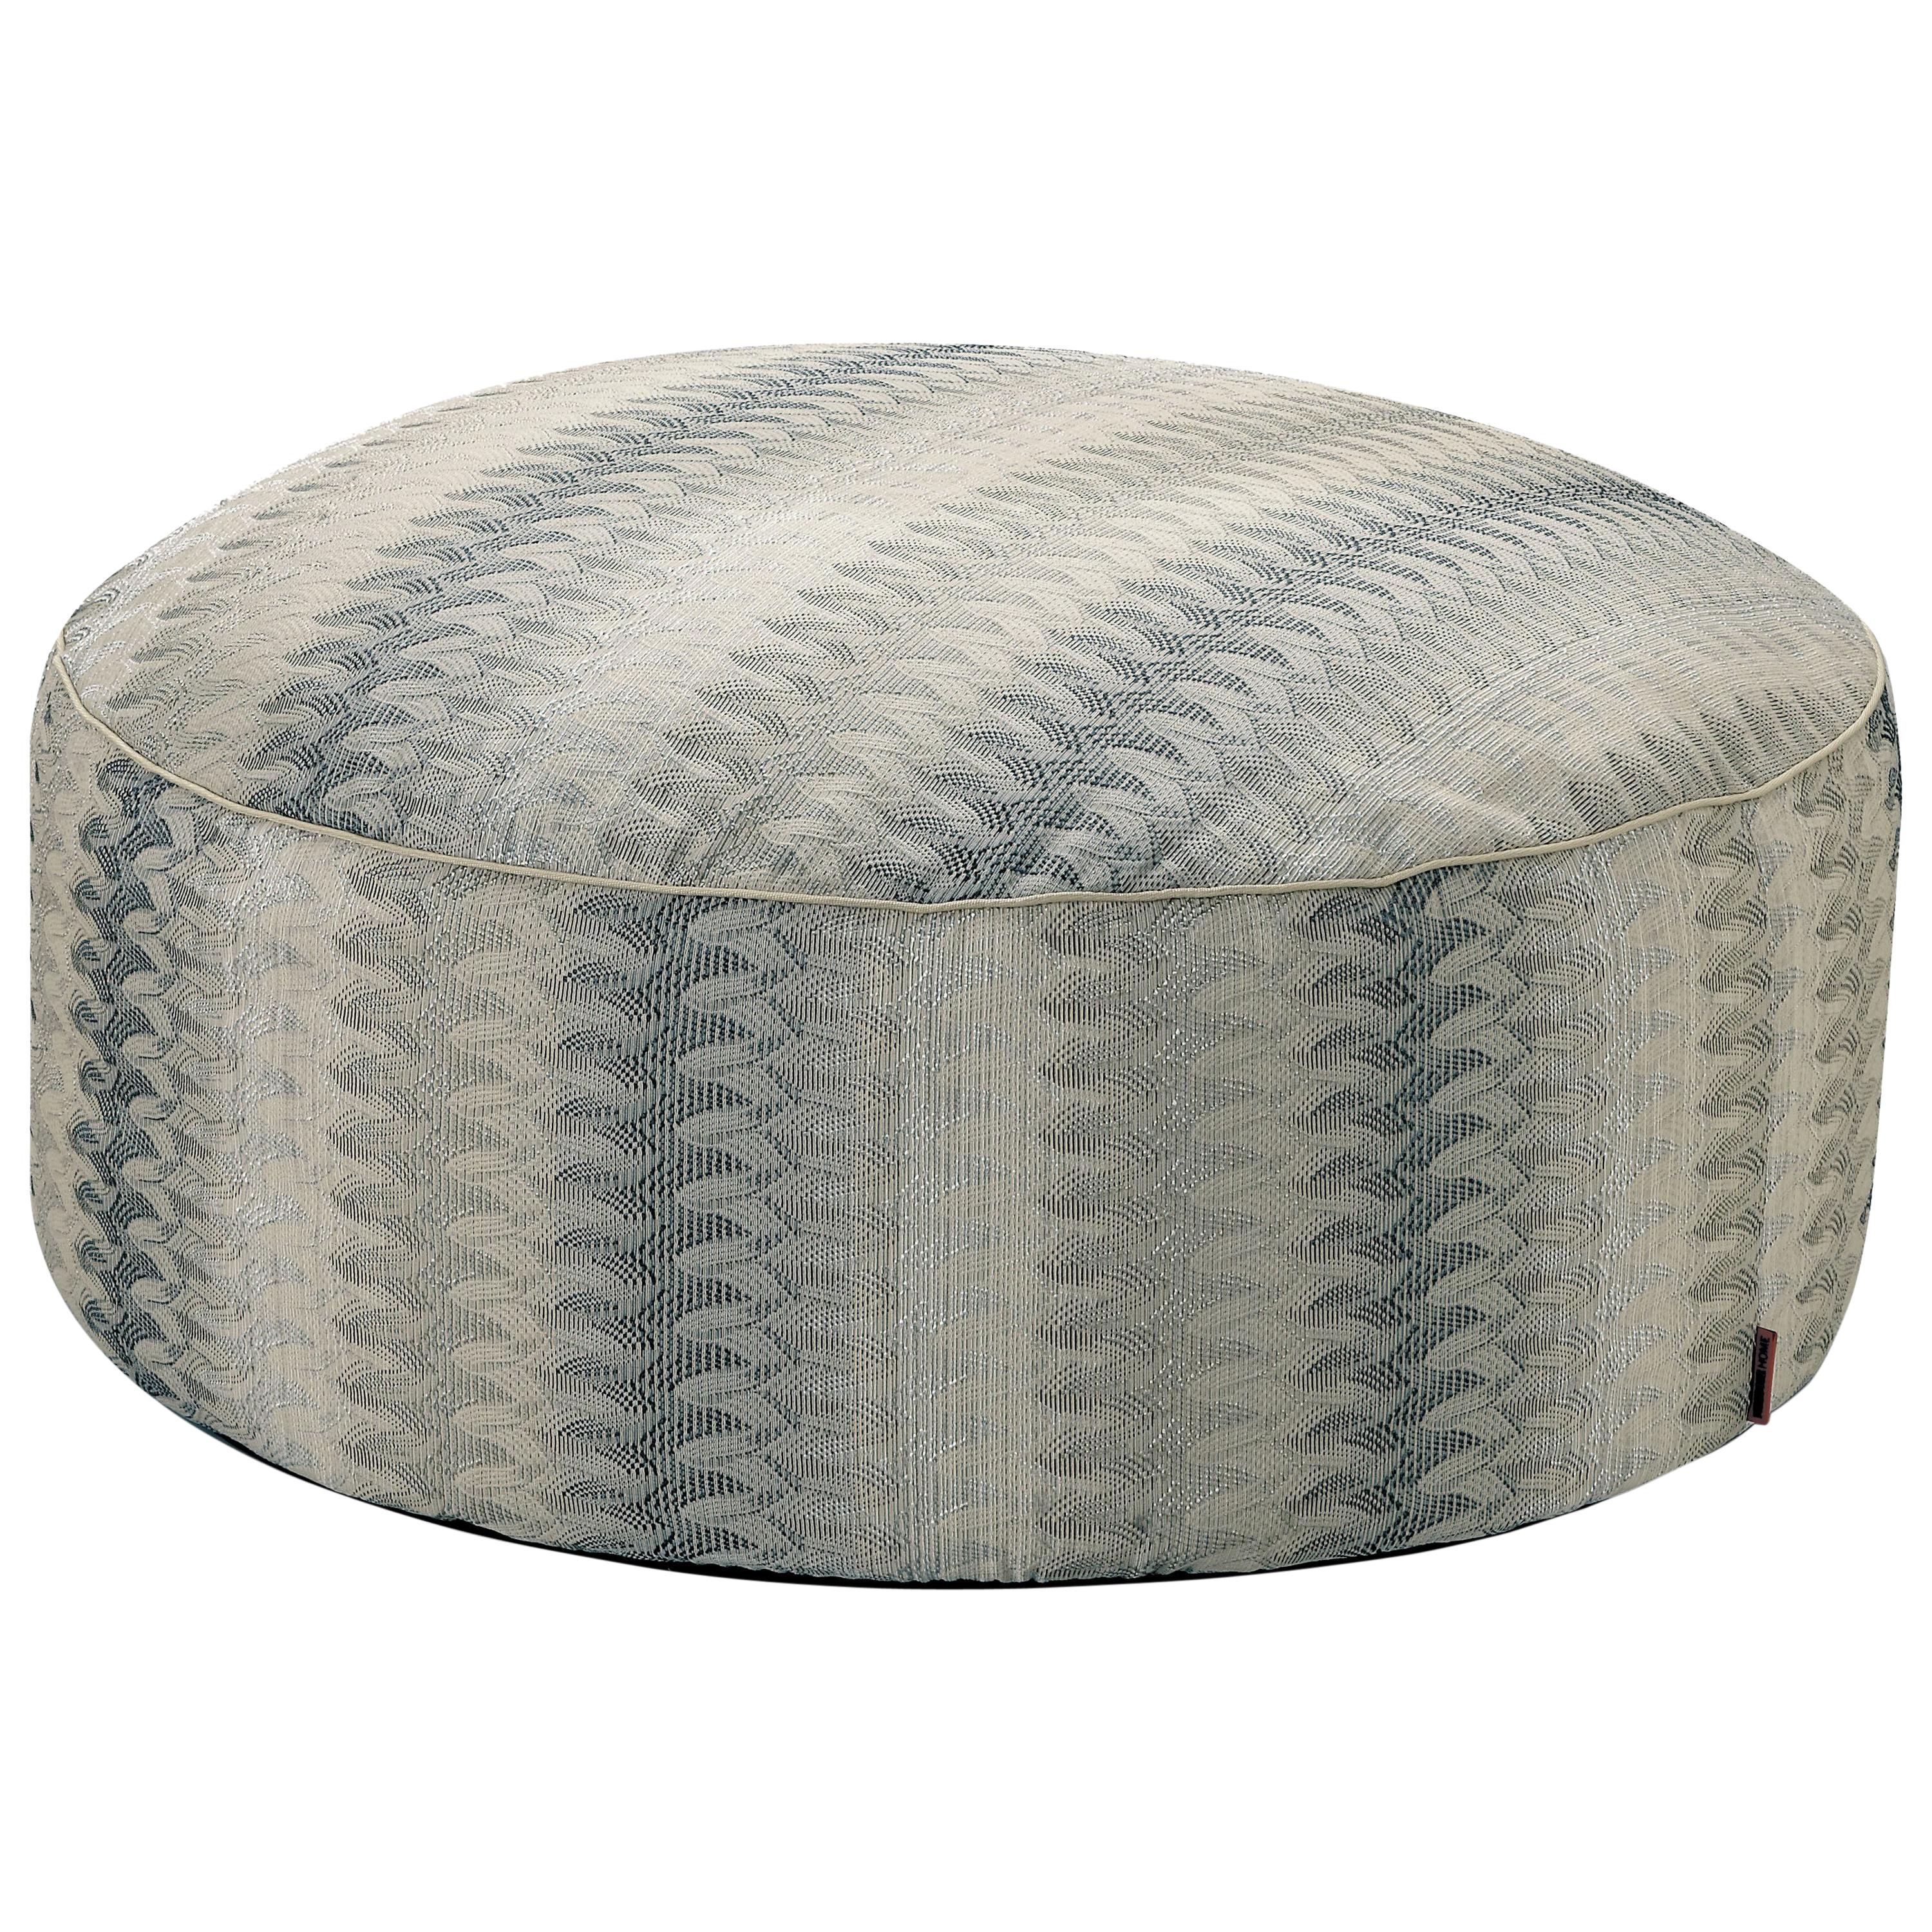 Missoni Home Remich Pallina Pouf in Blue and Gray with Lace-Inspired Print For Sale